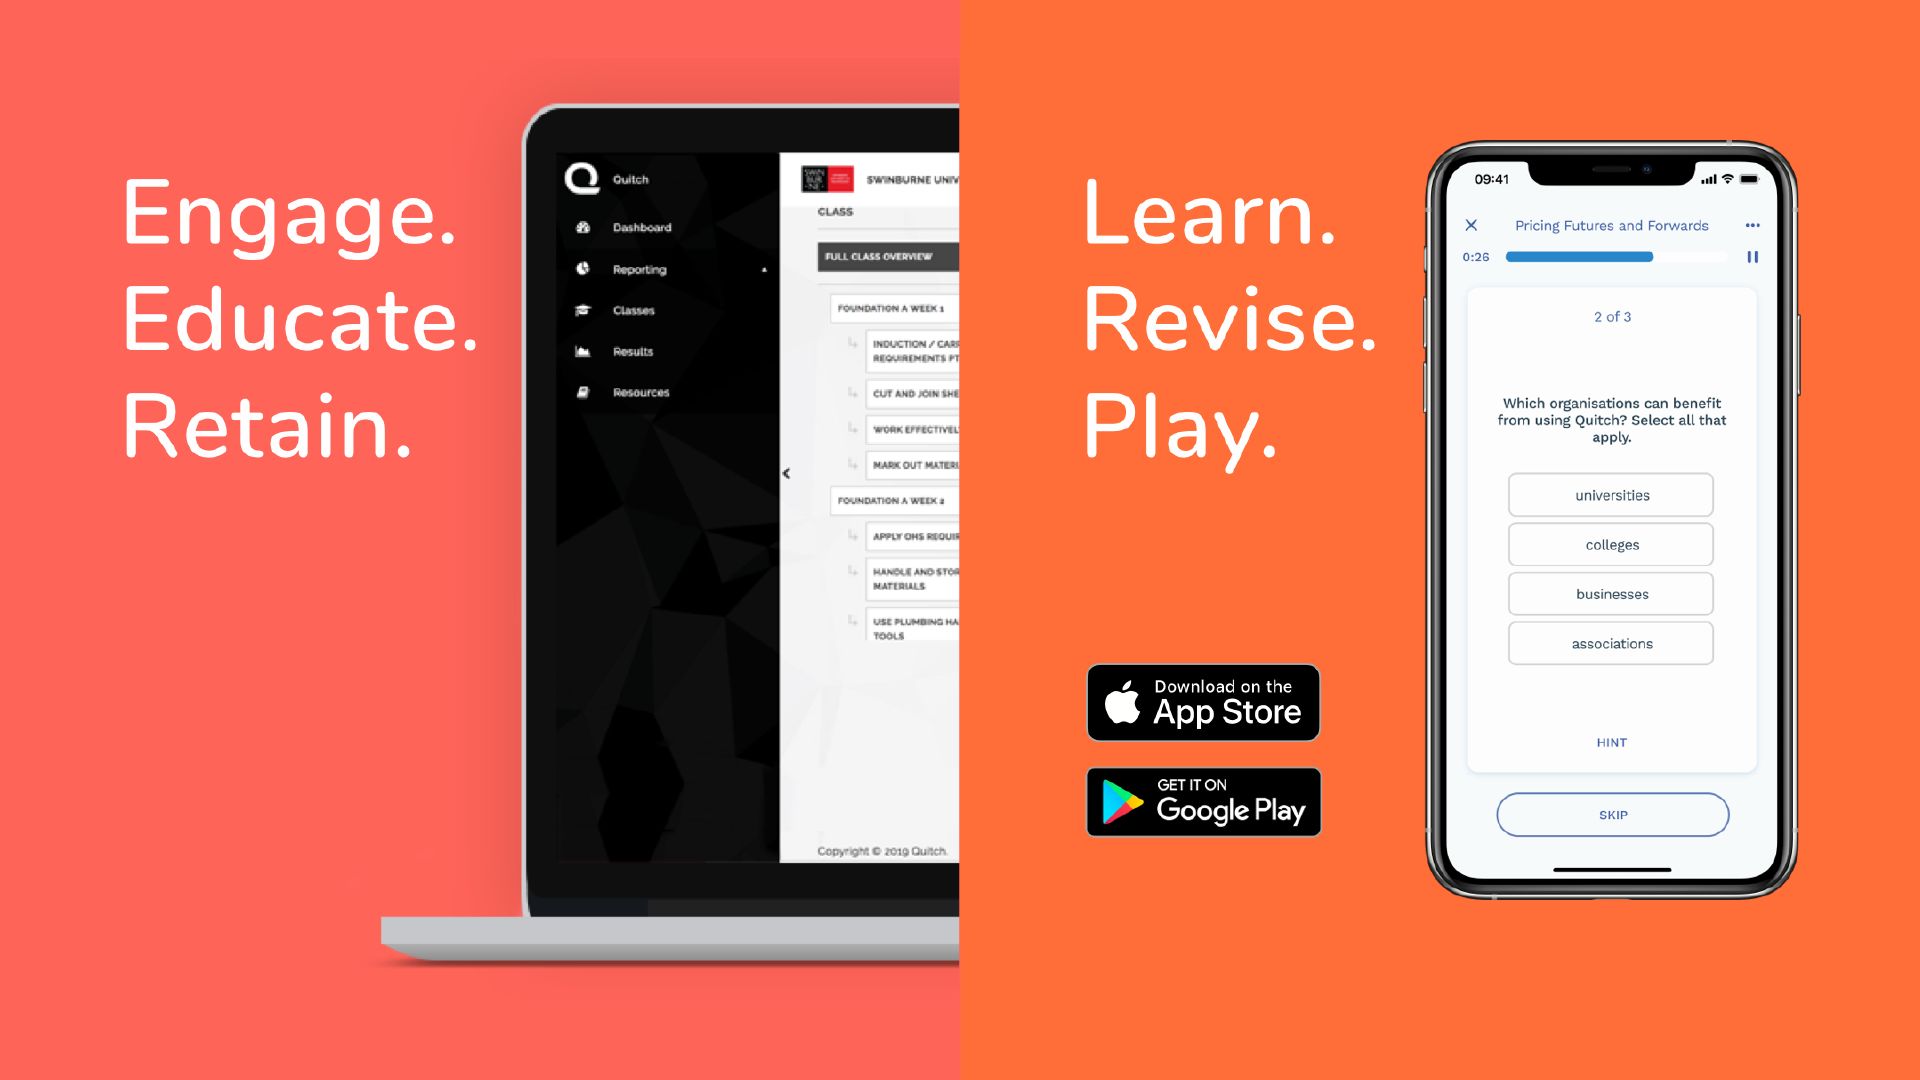 Two mockups of Quitch appear side by side. on the left is a laptop accompanied by the words Engage. Educate. Learn. On the right an iPhone is accompanied by the words Learn. Revise. Play.